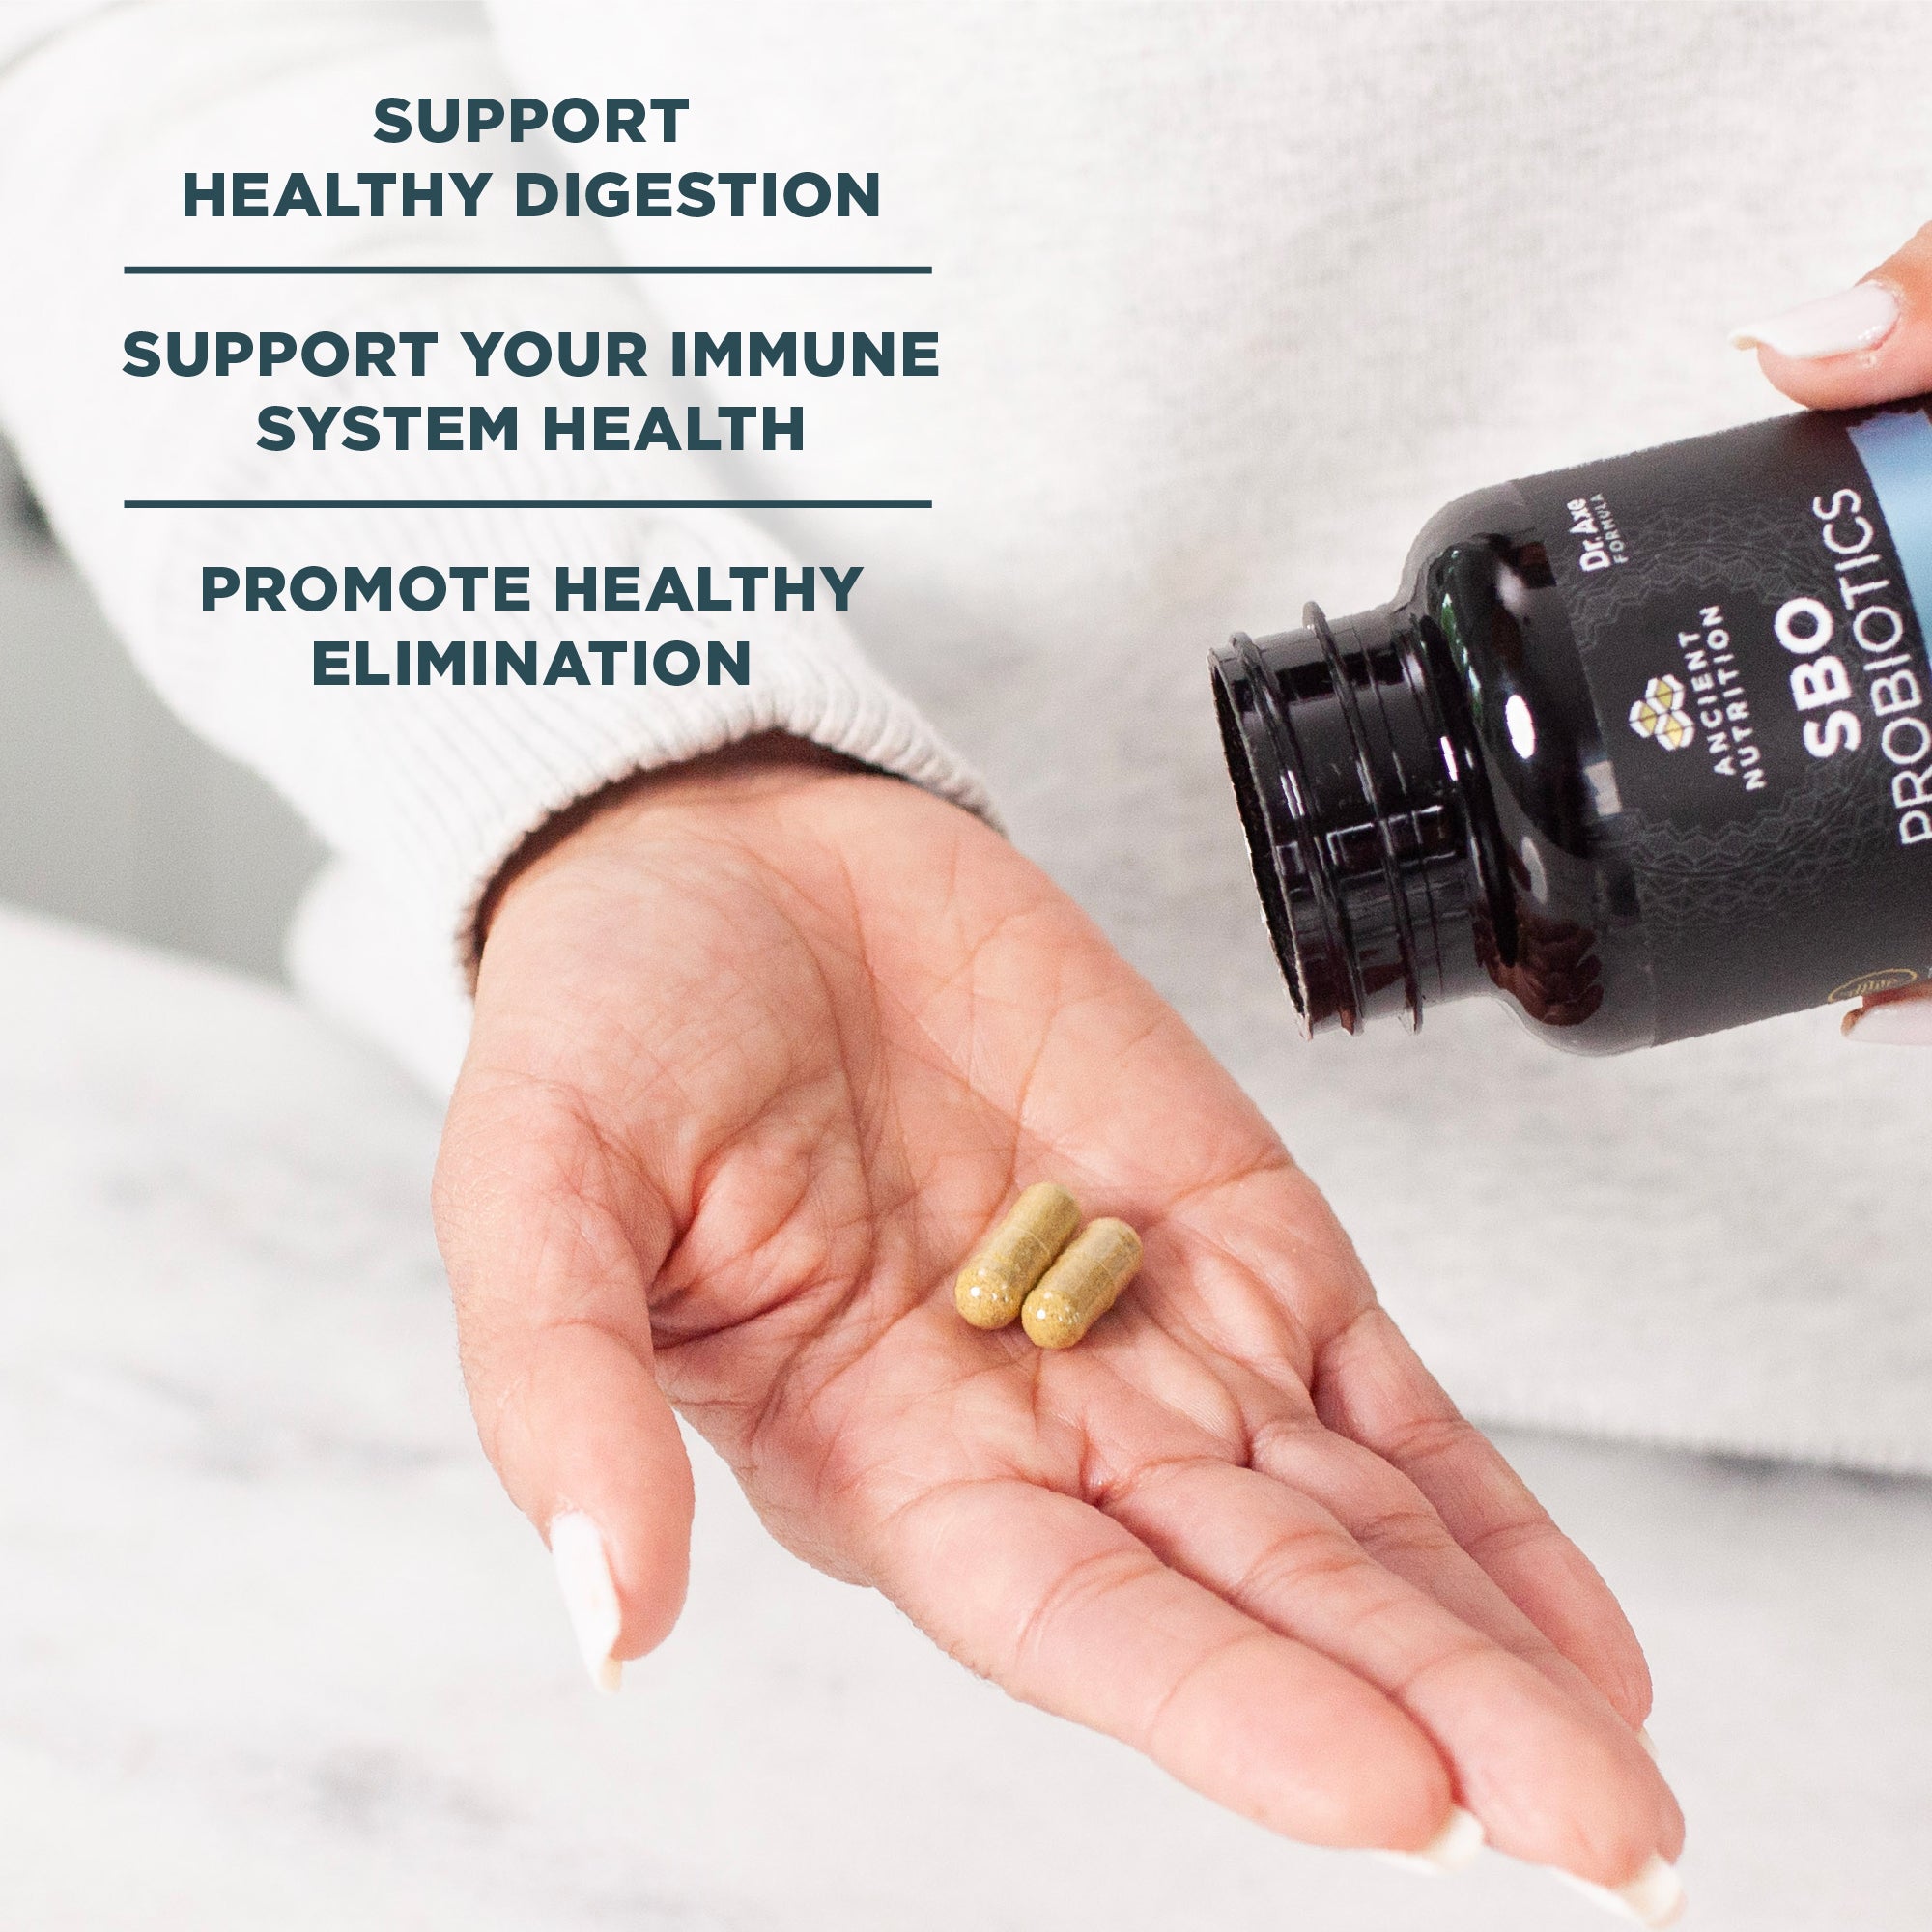 sbo probiotics ultimate in palm of hand